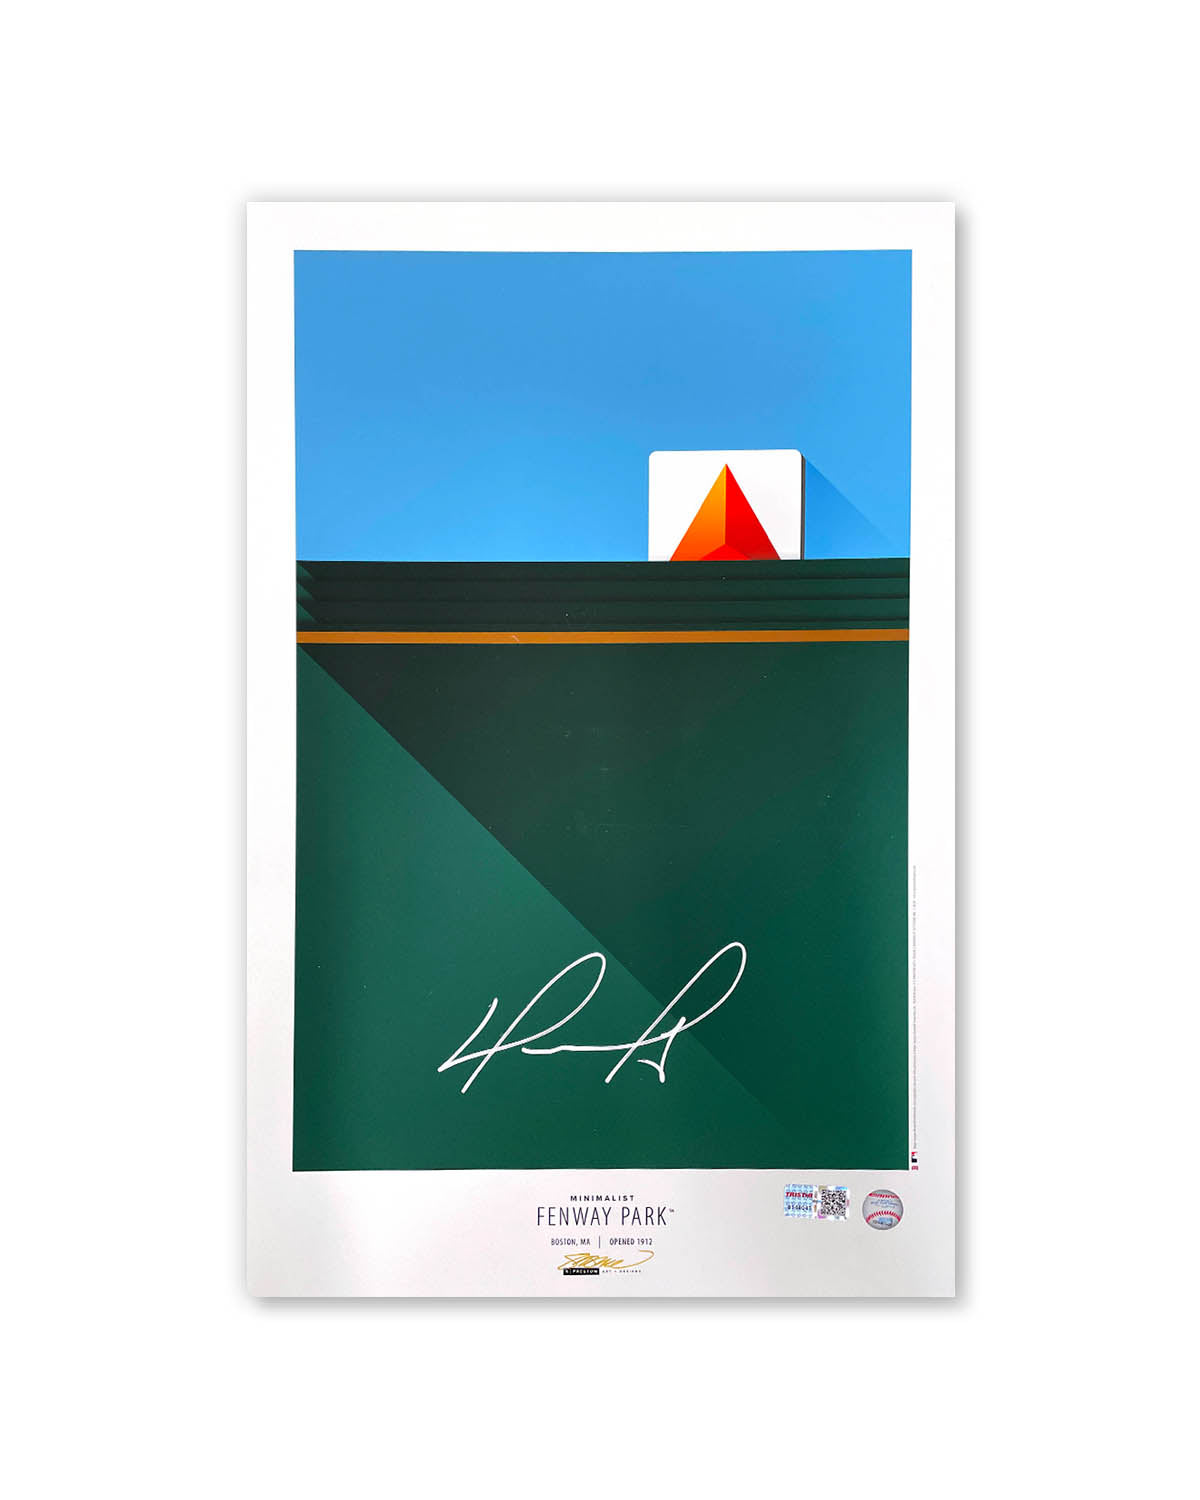 Seattle Kraken Autographed 14 x 20 Minimalist Print by S. Preston with Multiple Signatures - Limited Edition of 32